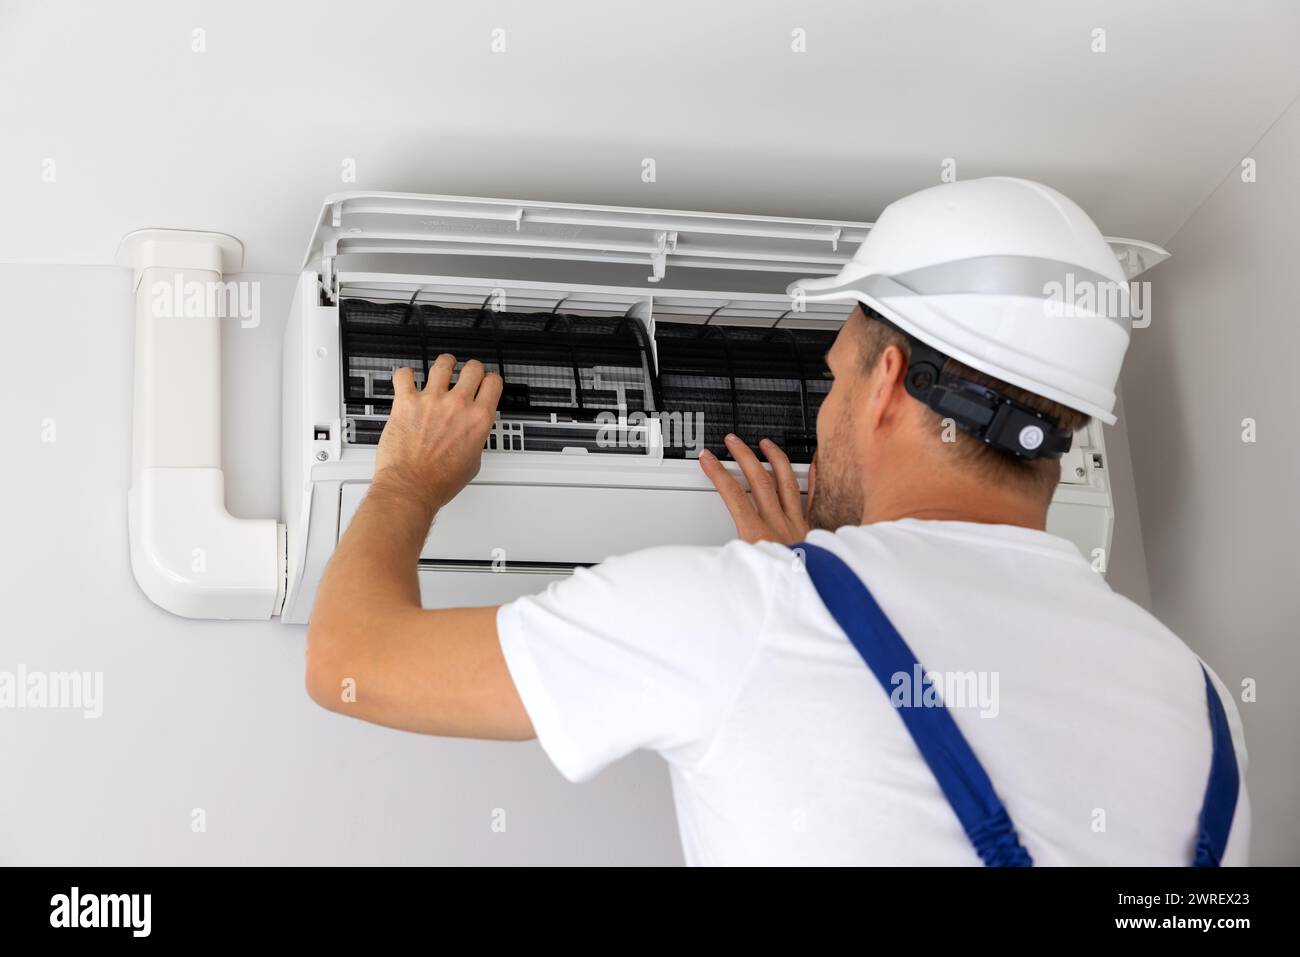 air conditioner maintenance and repair. hvac service technician at work Stock Photo